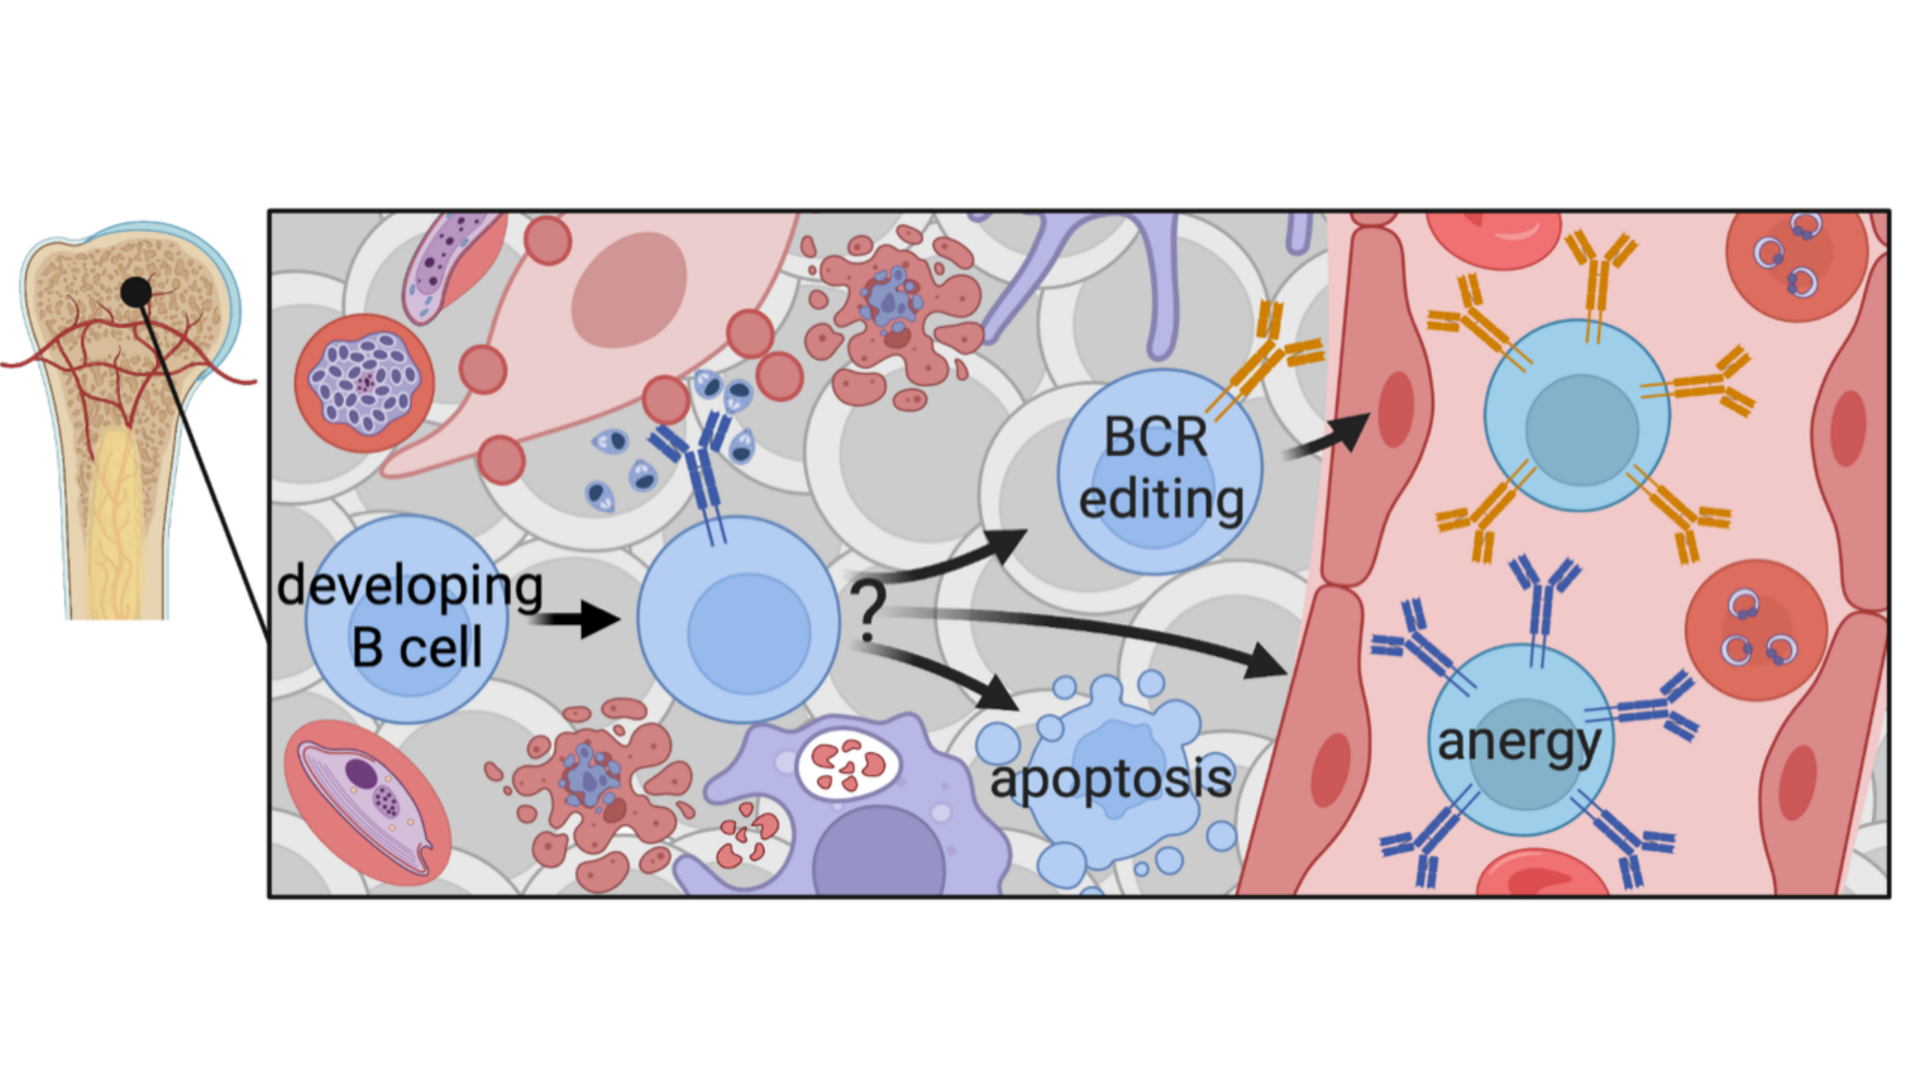 The red and blue graphic shows different types of cells and aims at visualising the central tolerance.